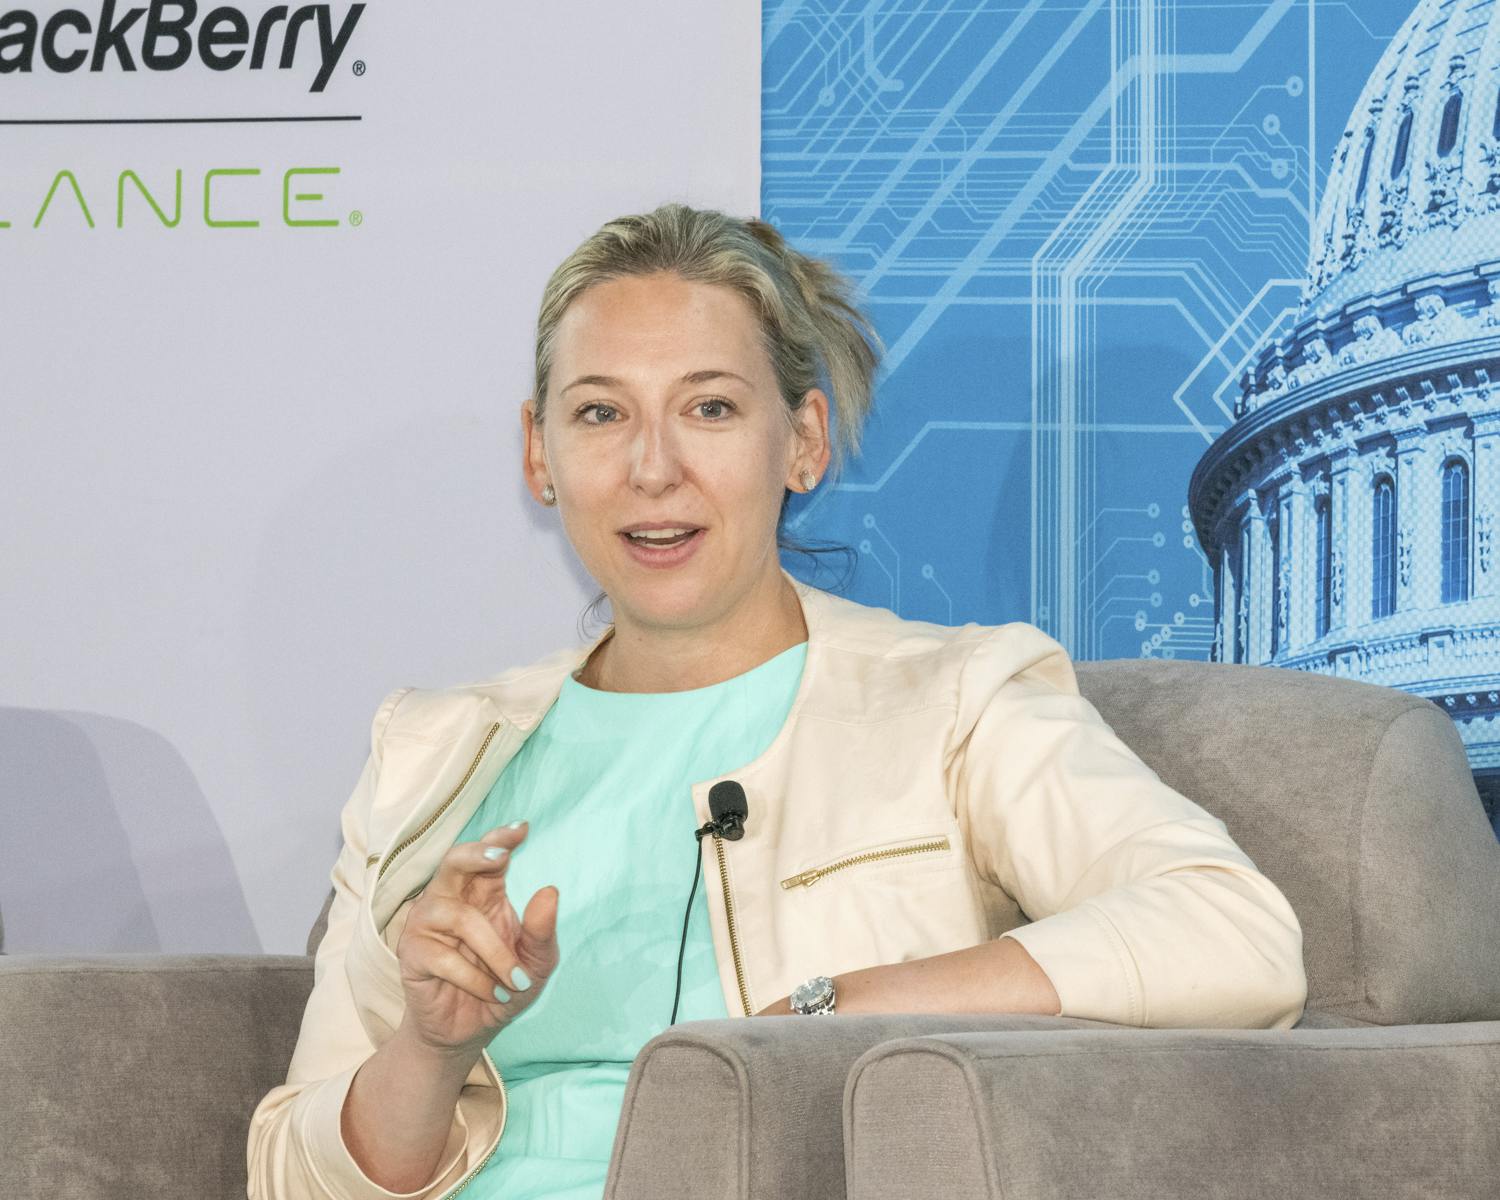 CISA Assistant Director for Cybersecurity Jeanette Manfra at State of Cyber CXO Tech Forum